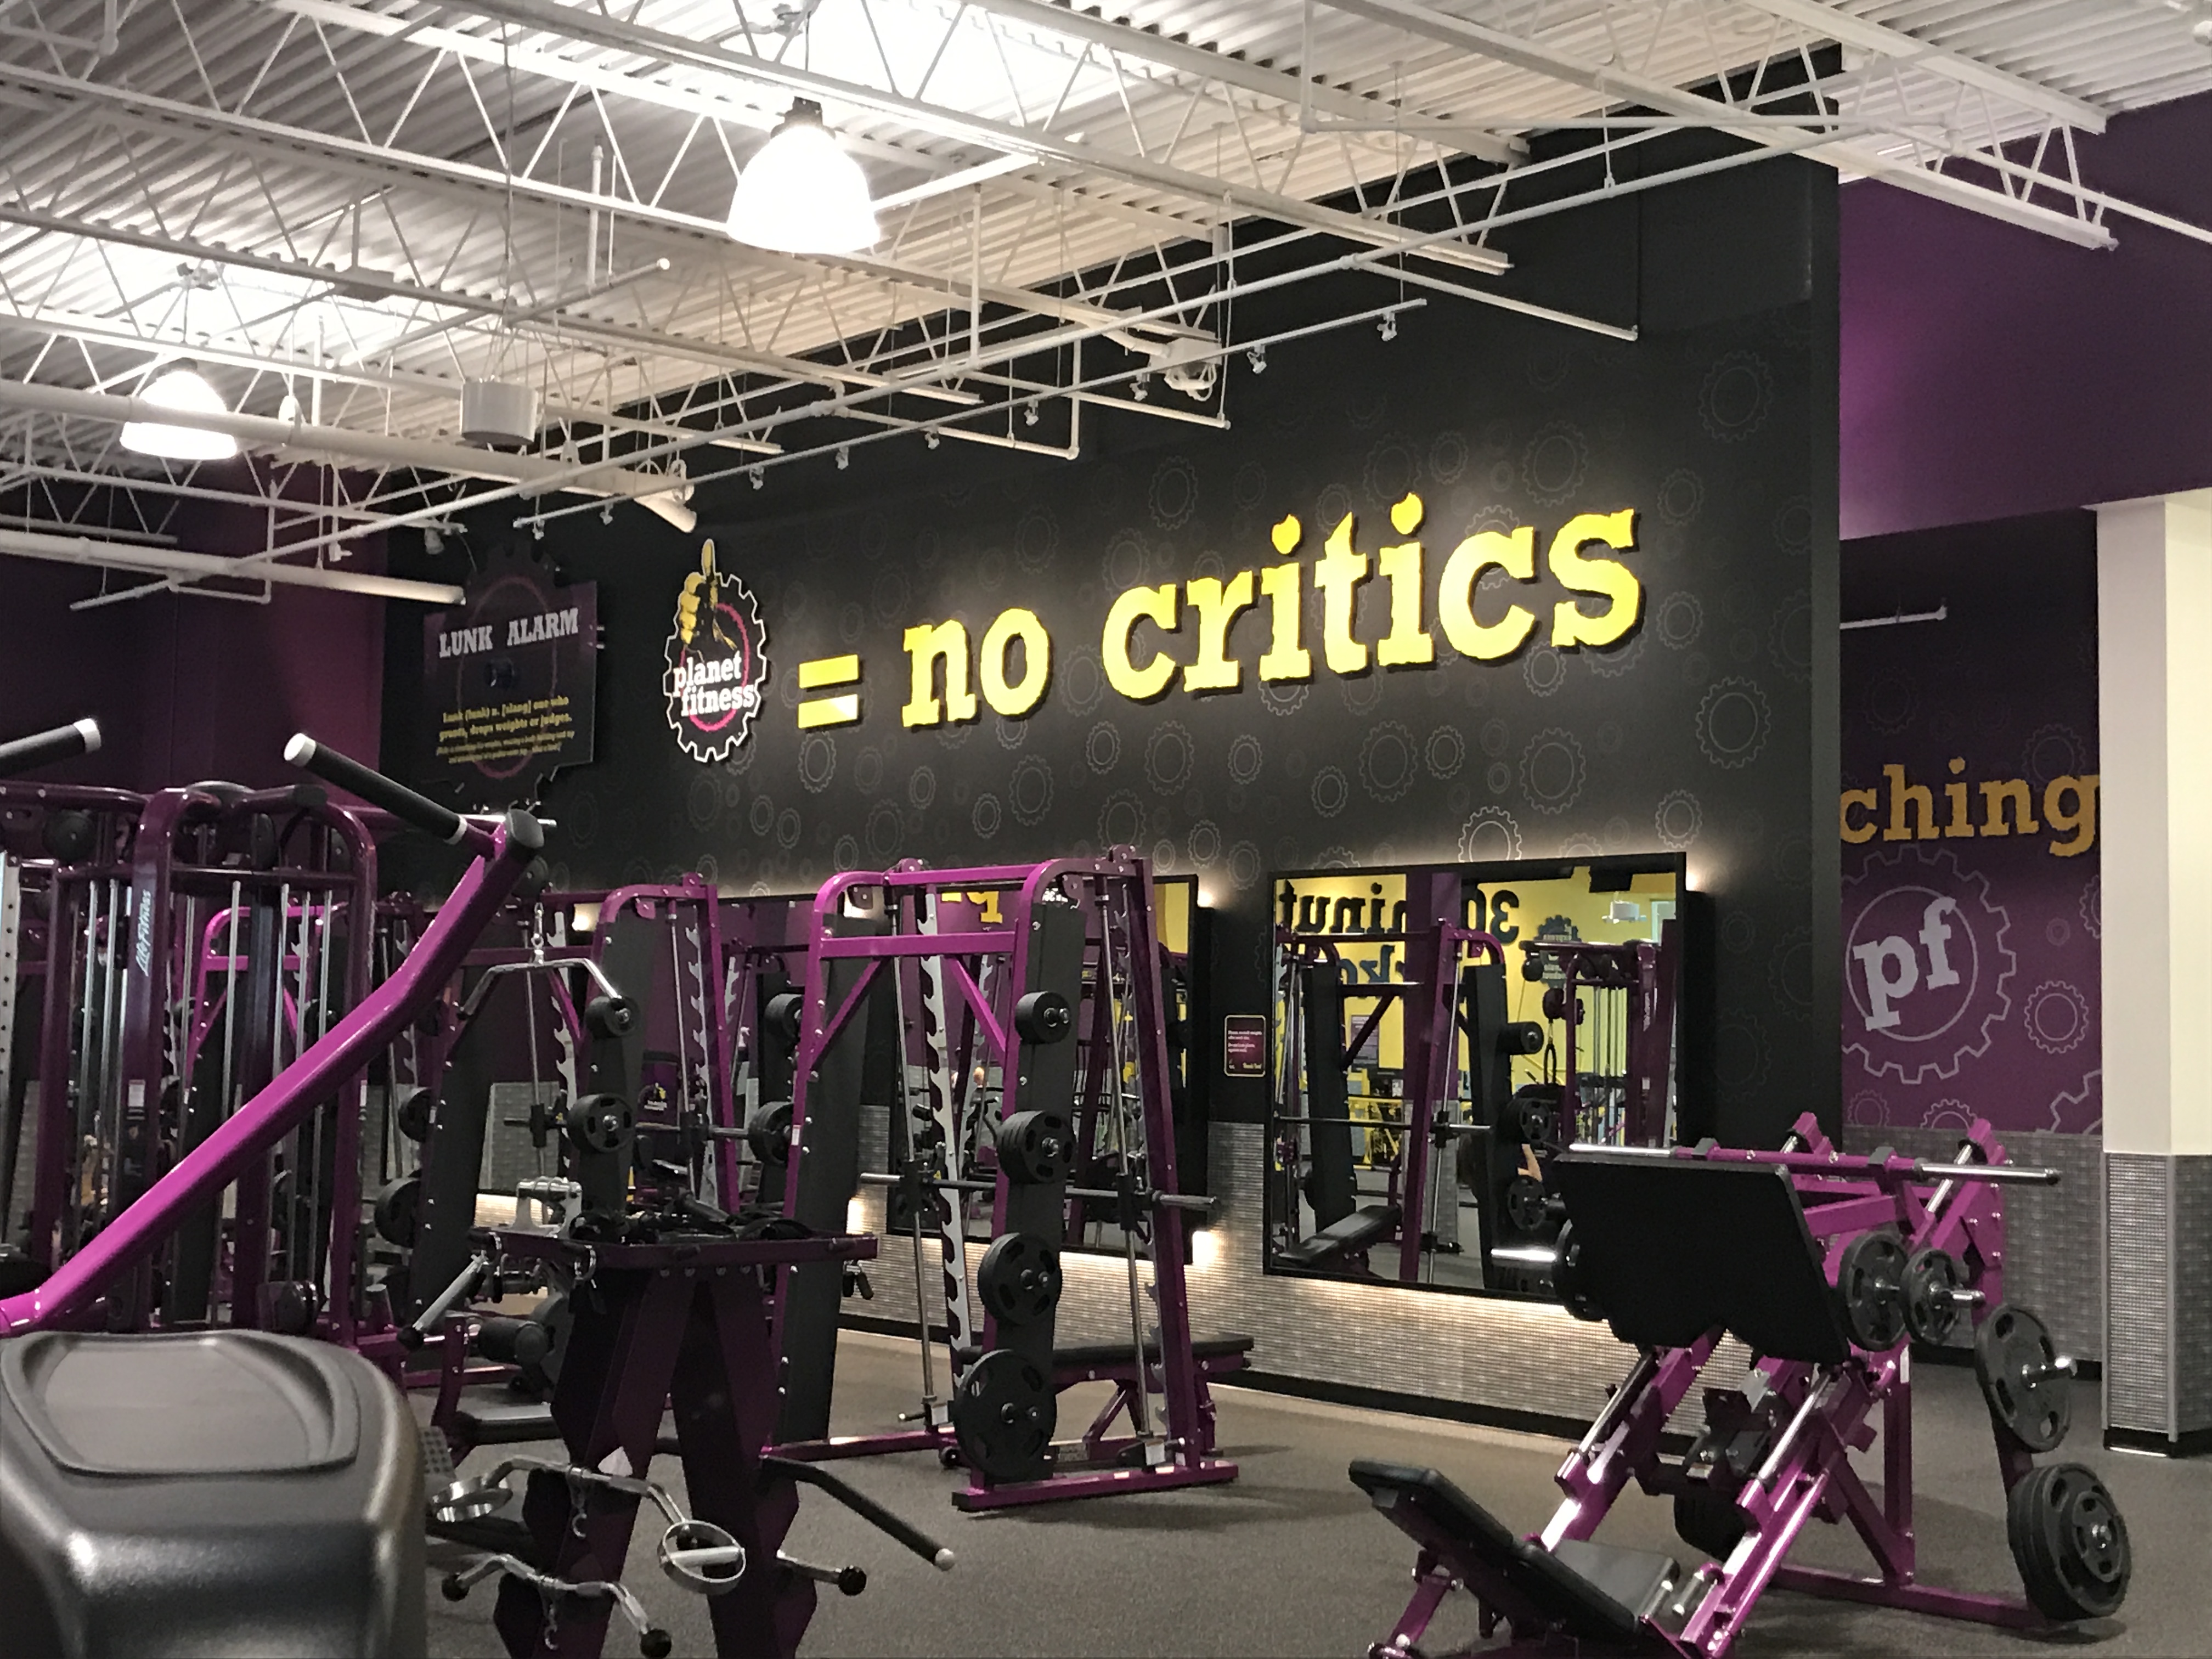 Planet Fitness: Grand Opening – The Gerrard Square